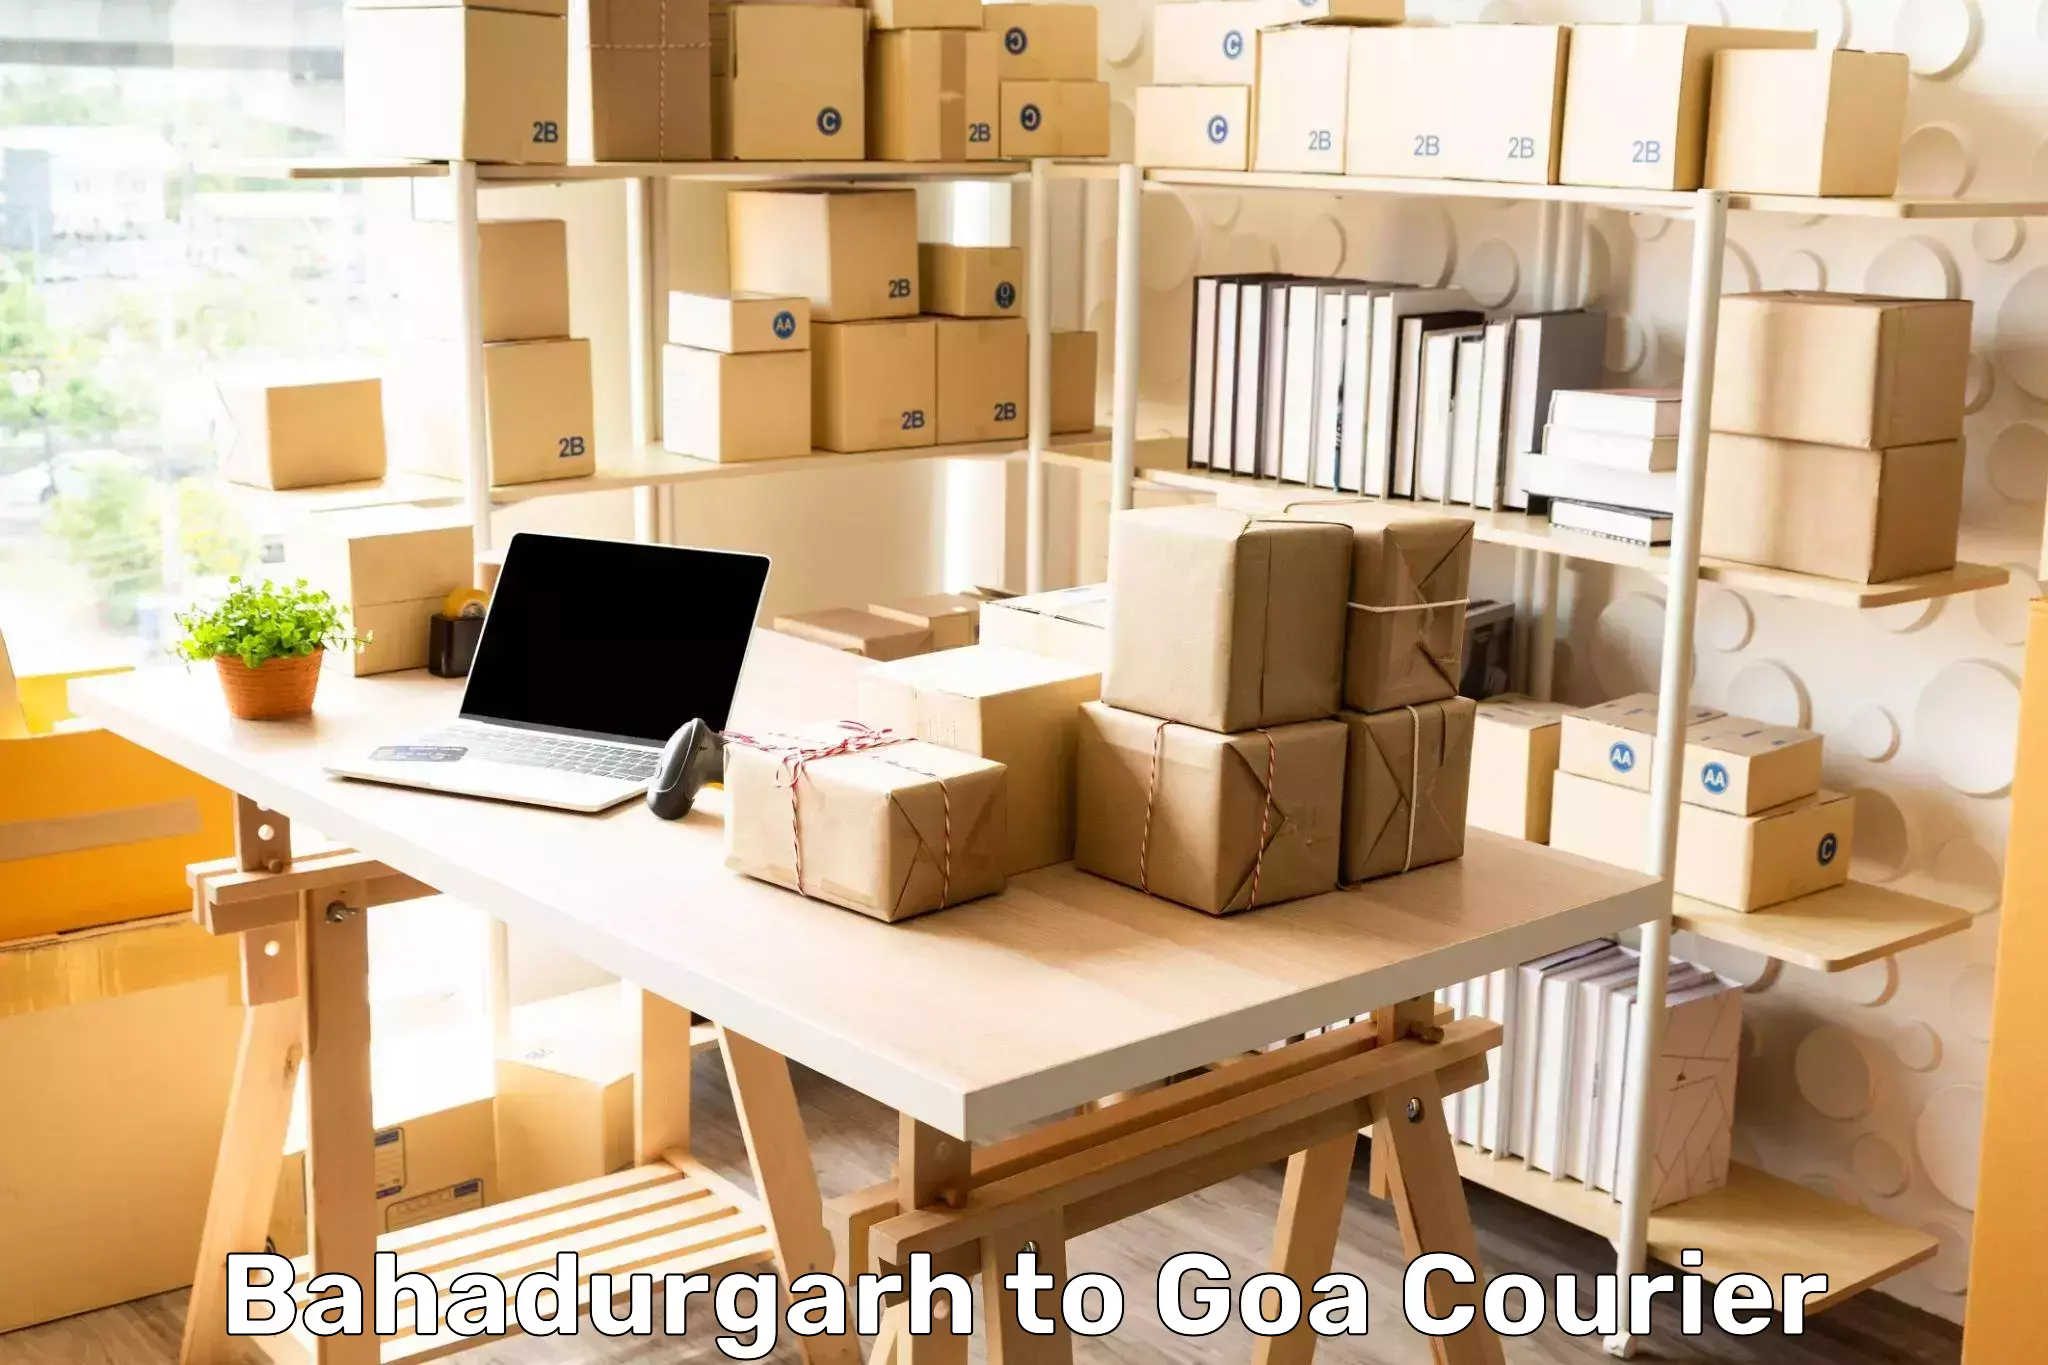 Streamlined delivery processes Bahadurgarh to Goa